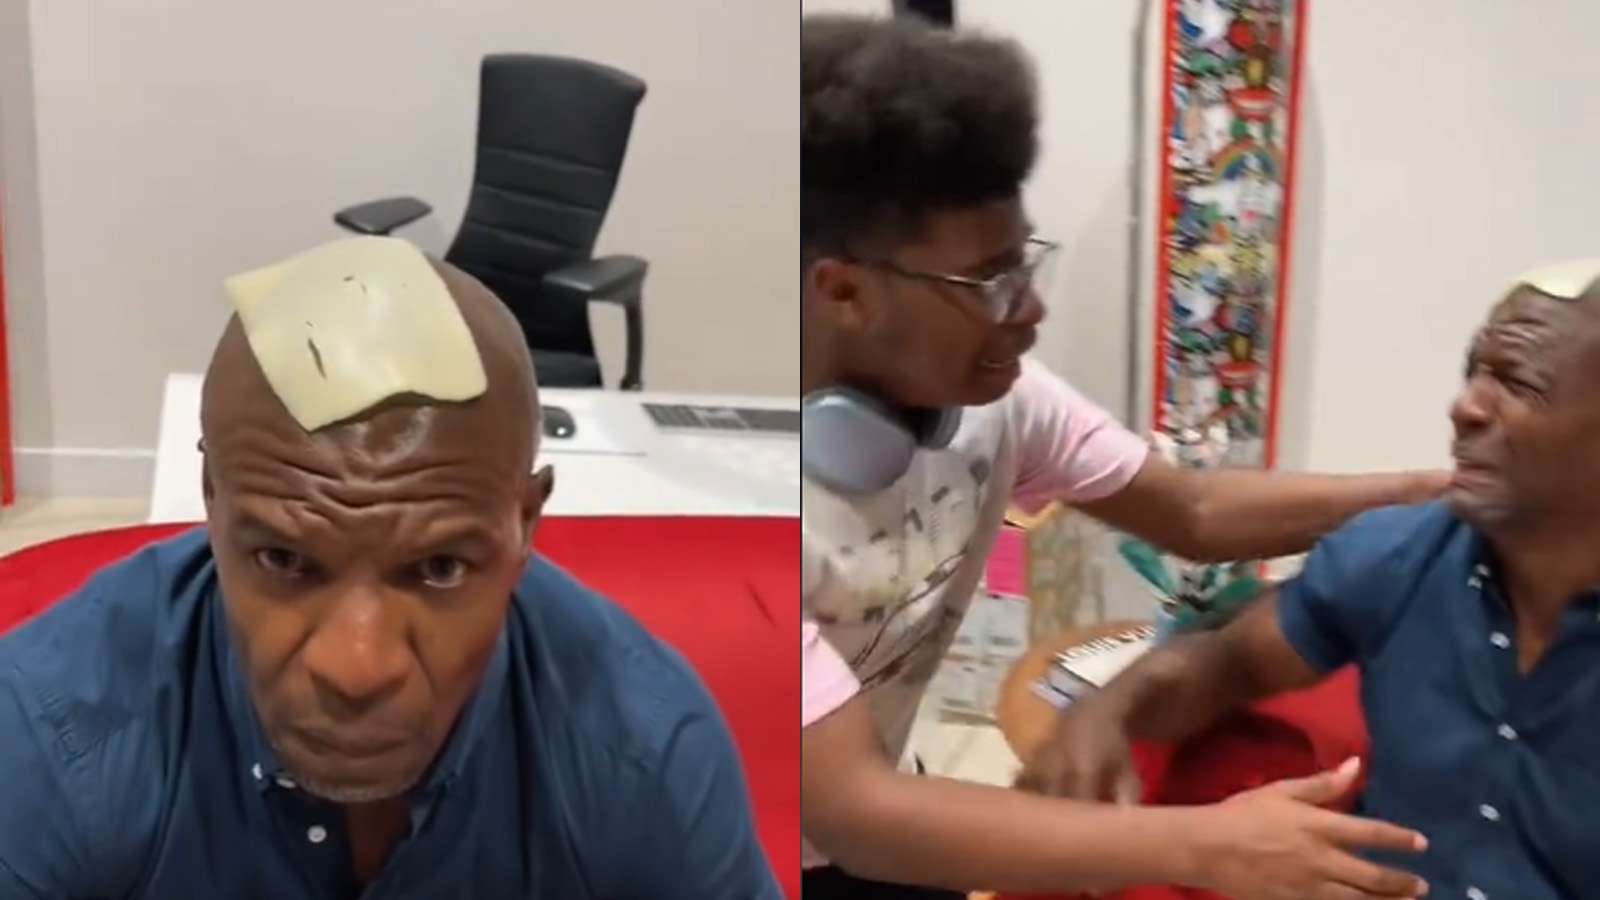 Viral Cheese of Truth TikToker shocks fans with Terry Crews collab